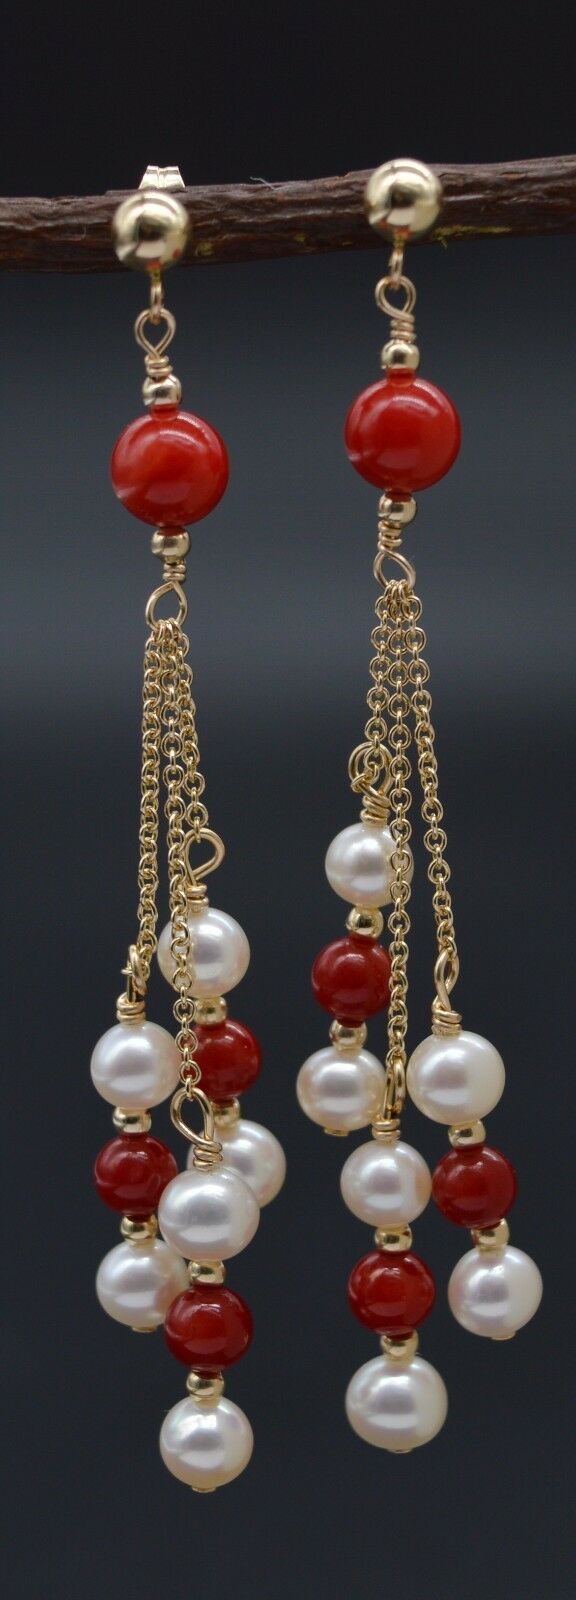 New 14K Solid Gold Natural Coral & Pearl Chandelier Dangle Earrings